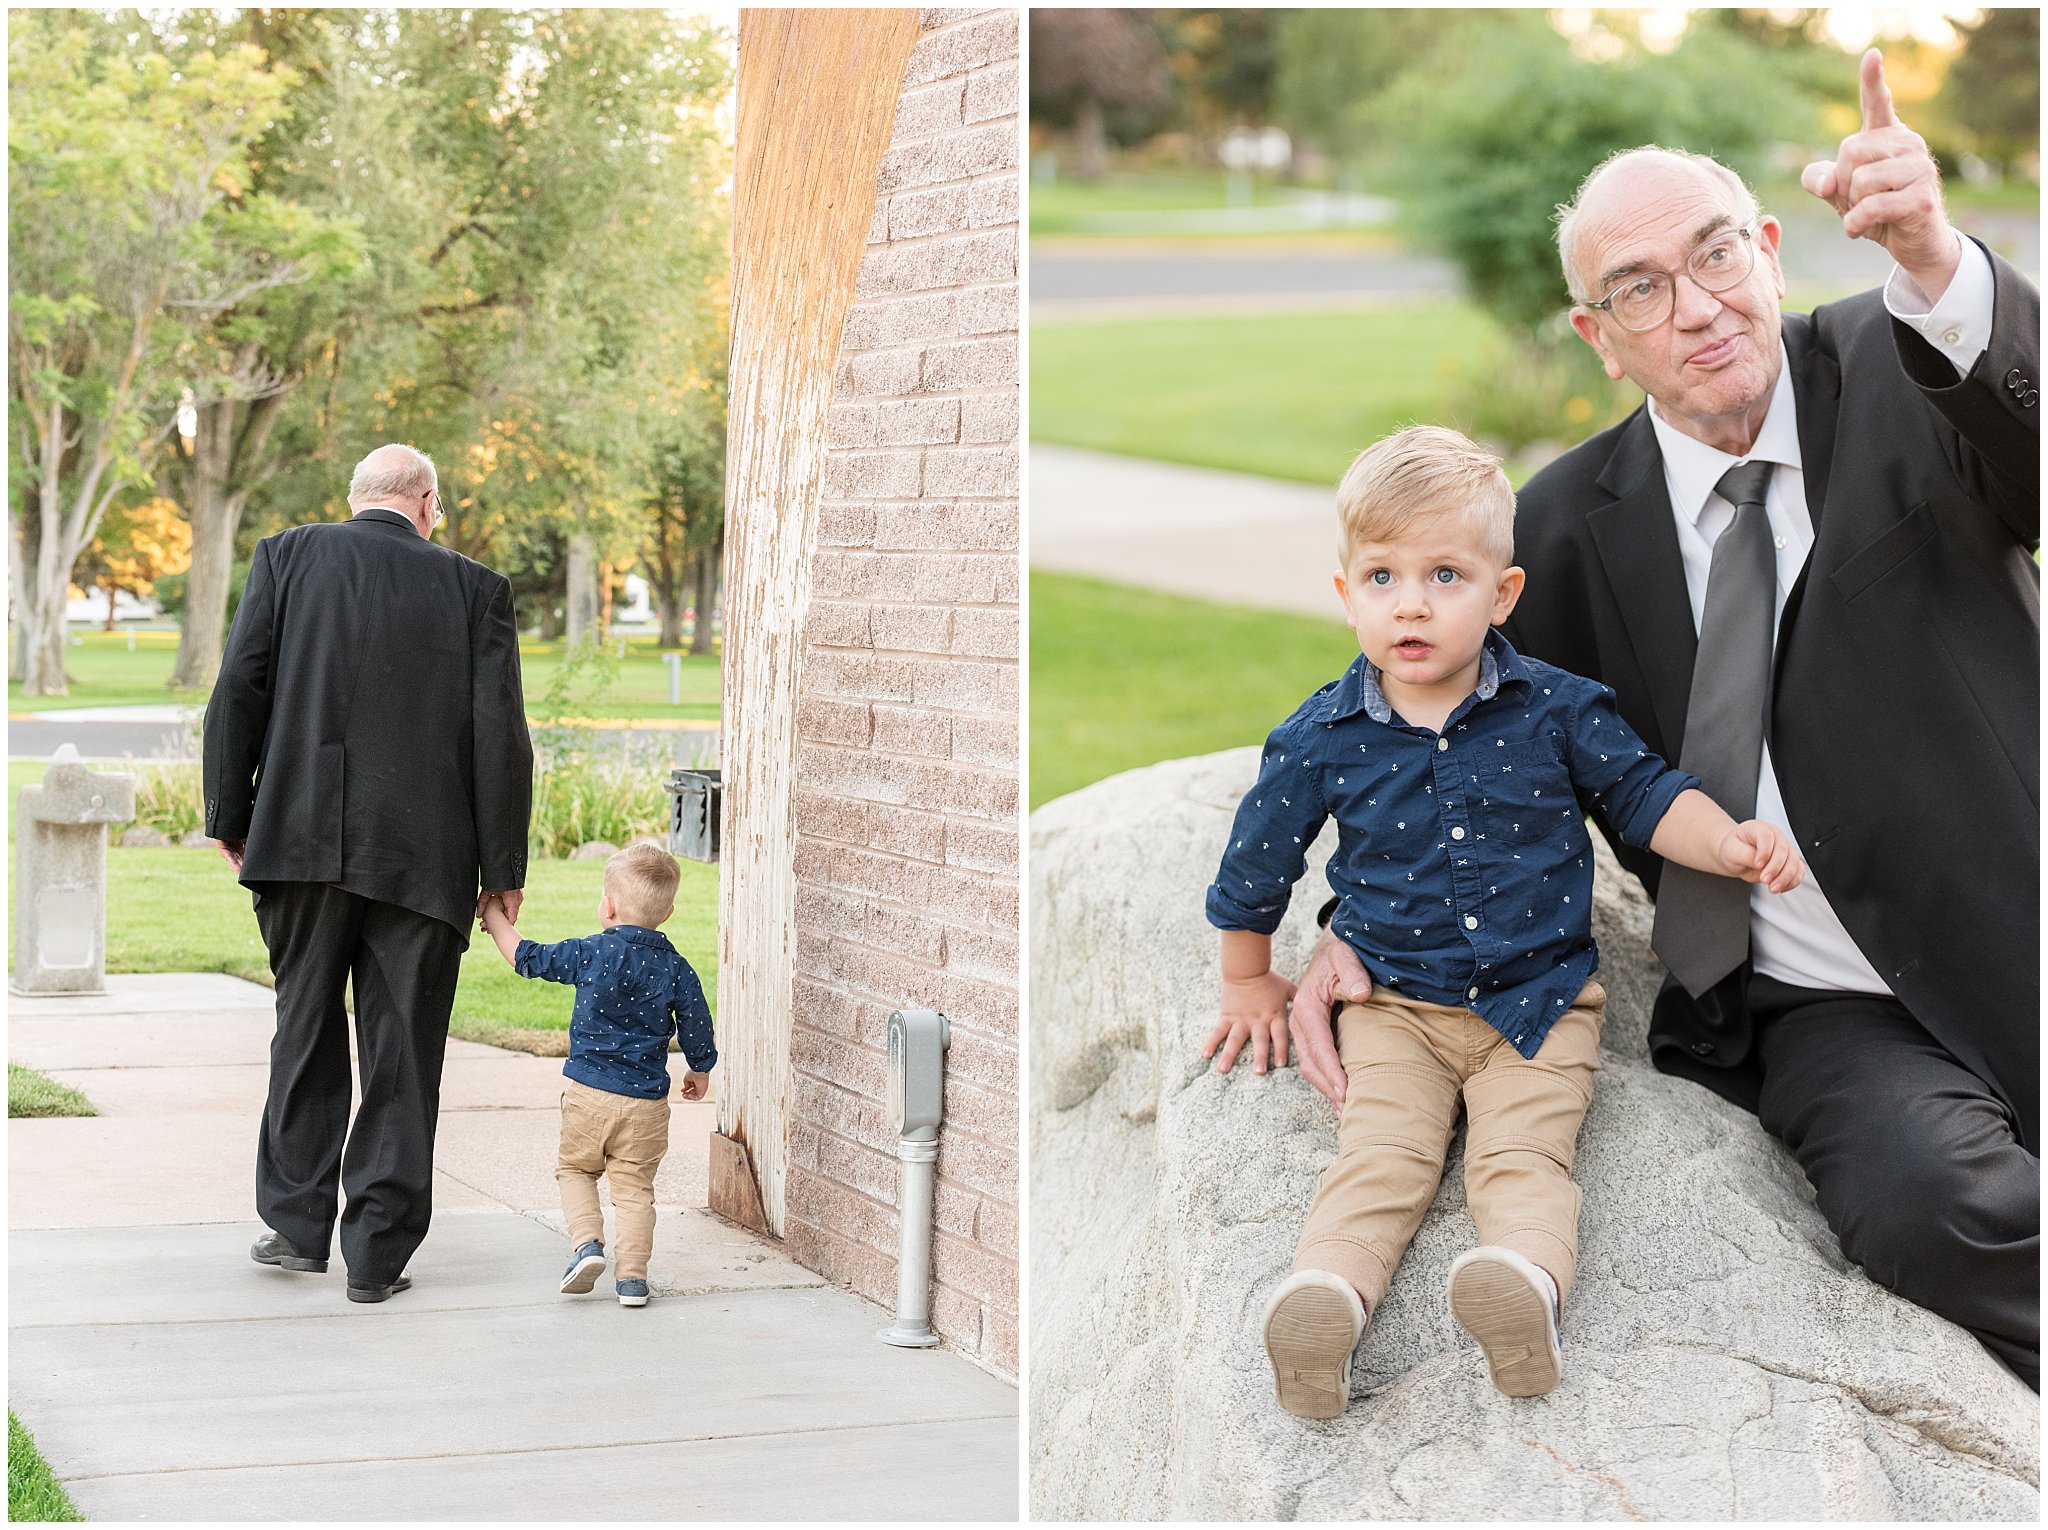 Grandpa and grandson at the park candid | Layton Commons Park | Layton Couples Photographer | Jessie and Dallin